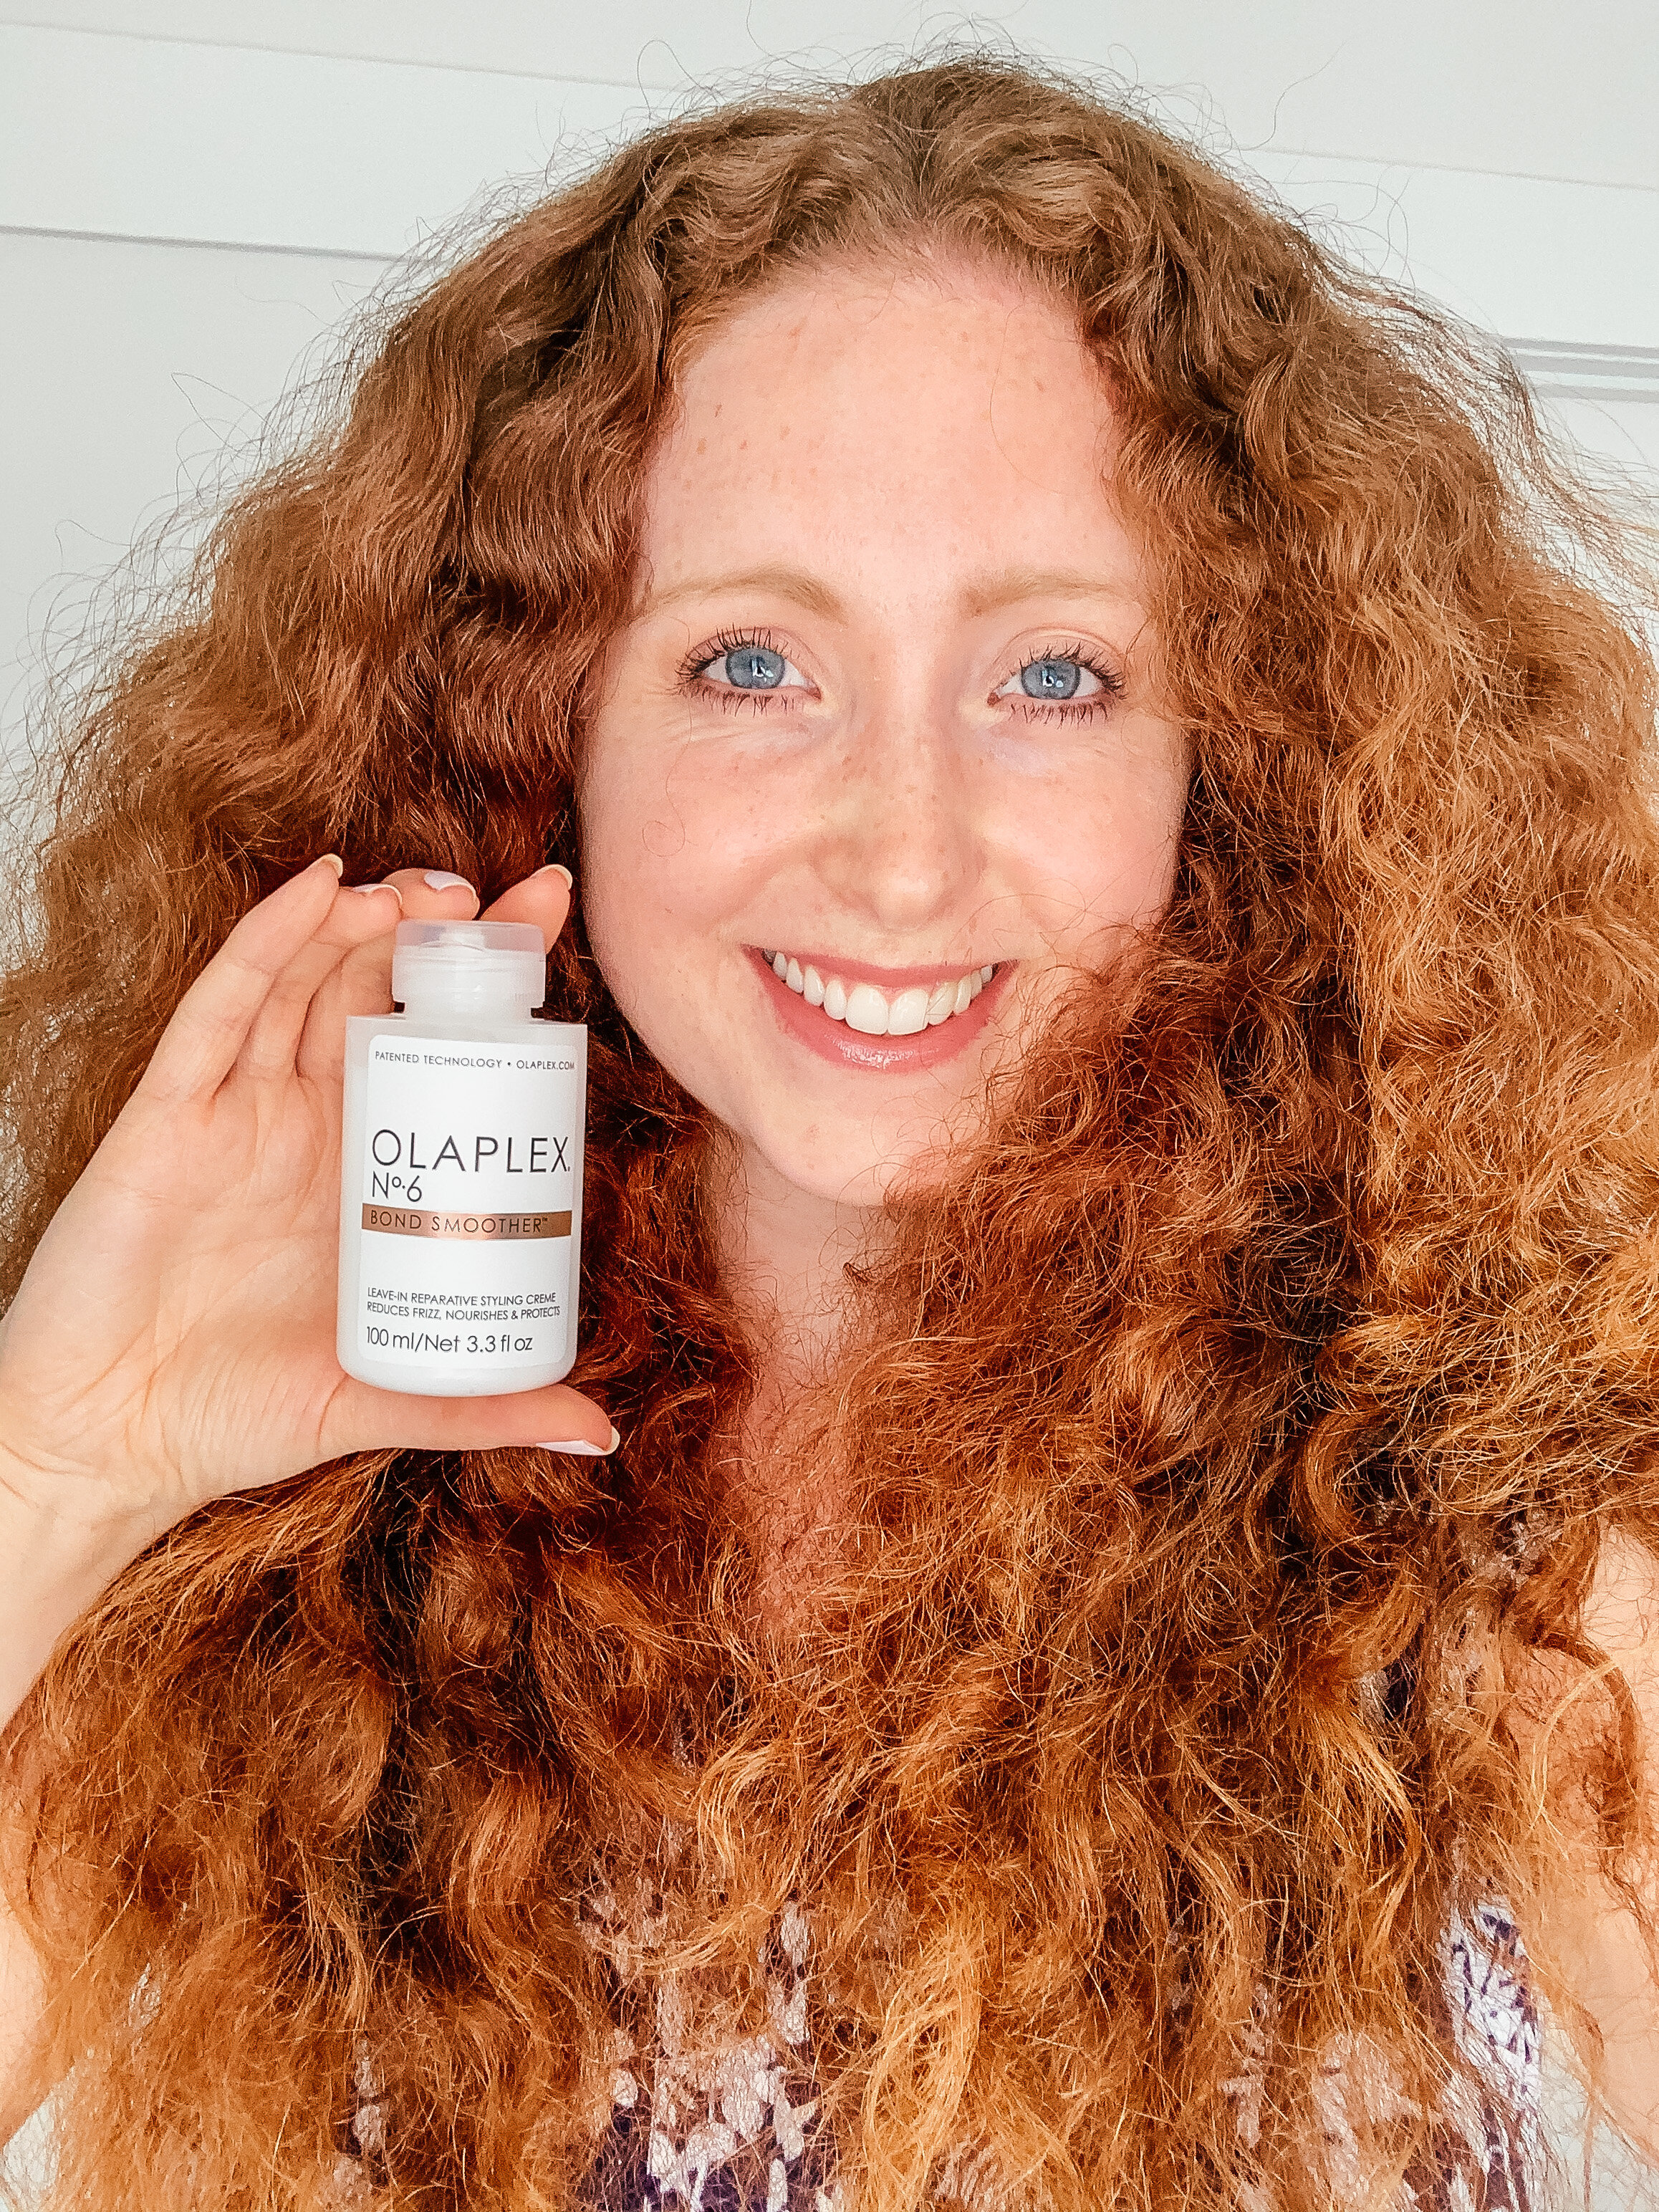 Learn everything you need to know about Olaplex 6 bond smoother in these Olaplex 6 reviews. I’ve also included Olaplex 6 before and after images.  Find out if Olaplex 6 is worth it in this detailed Olaplex 6 review.  There is also a section on Olaple